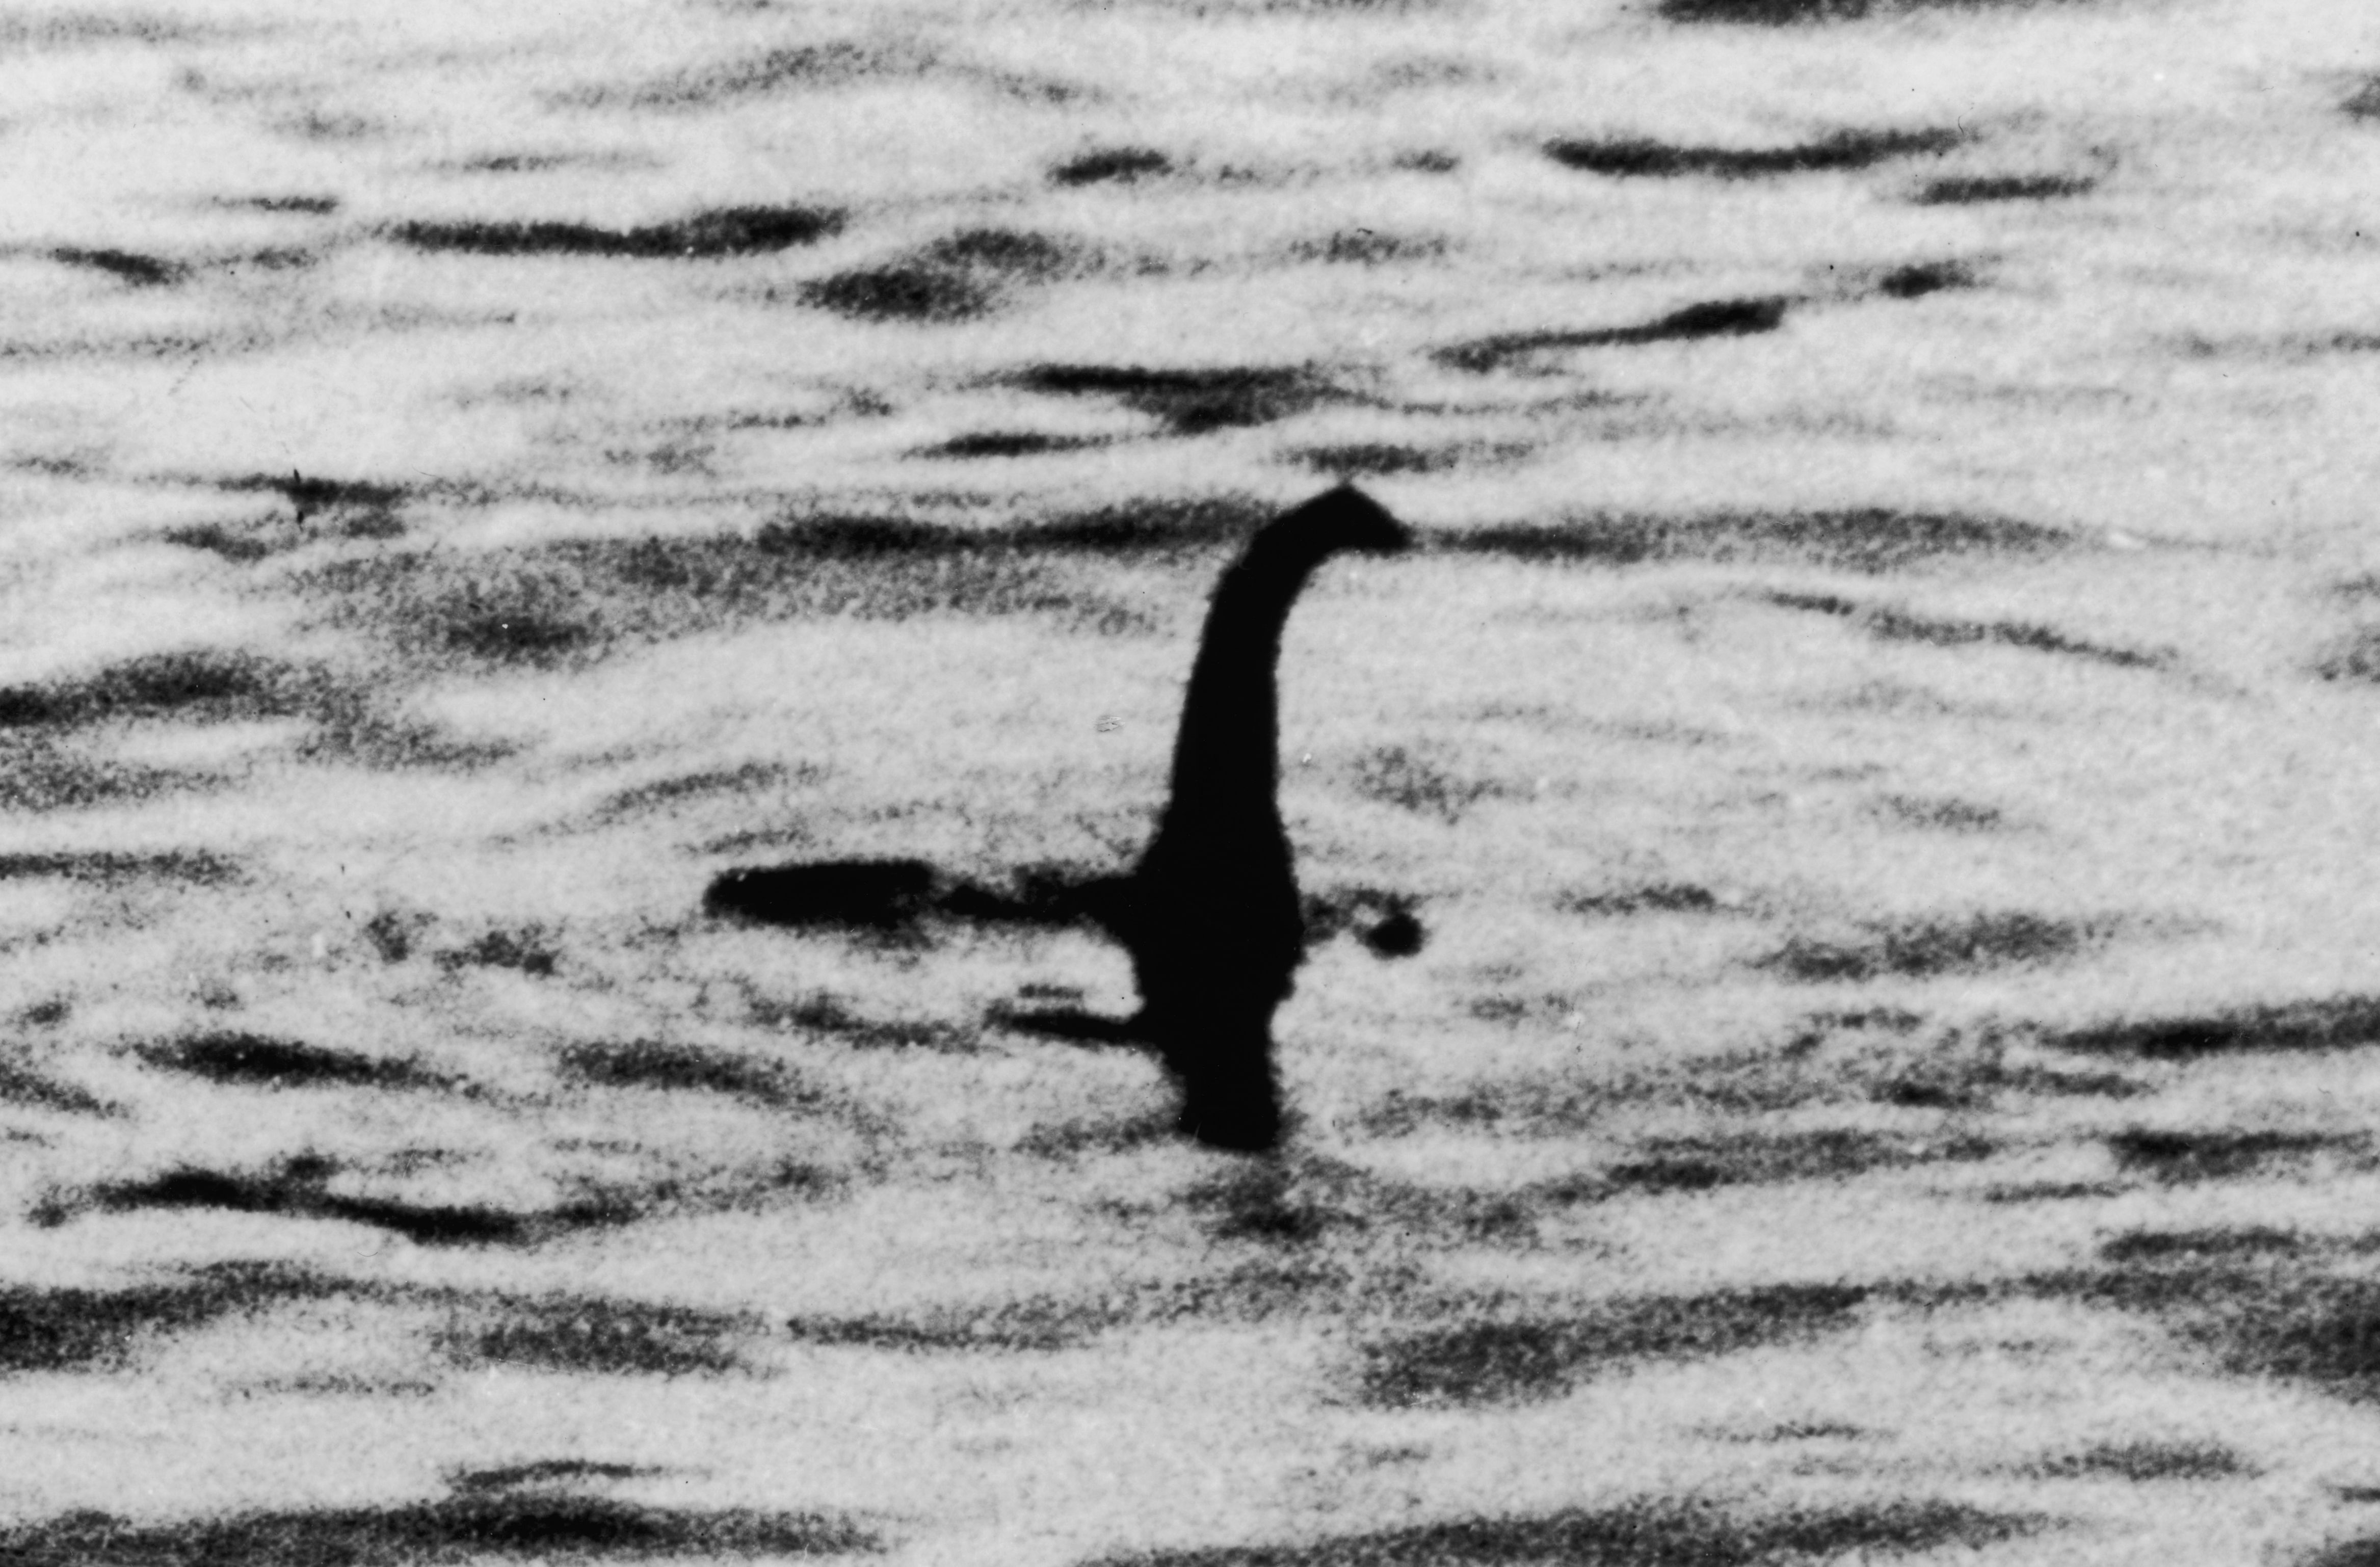 Is the Loch Ness Monster real? New photo fuels speculation